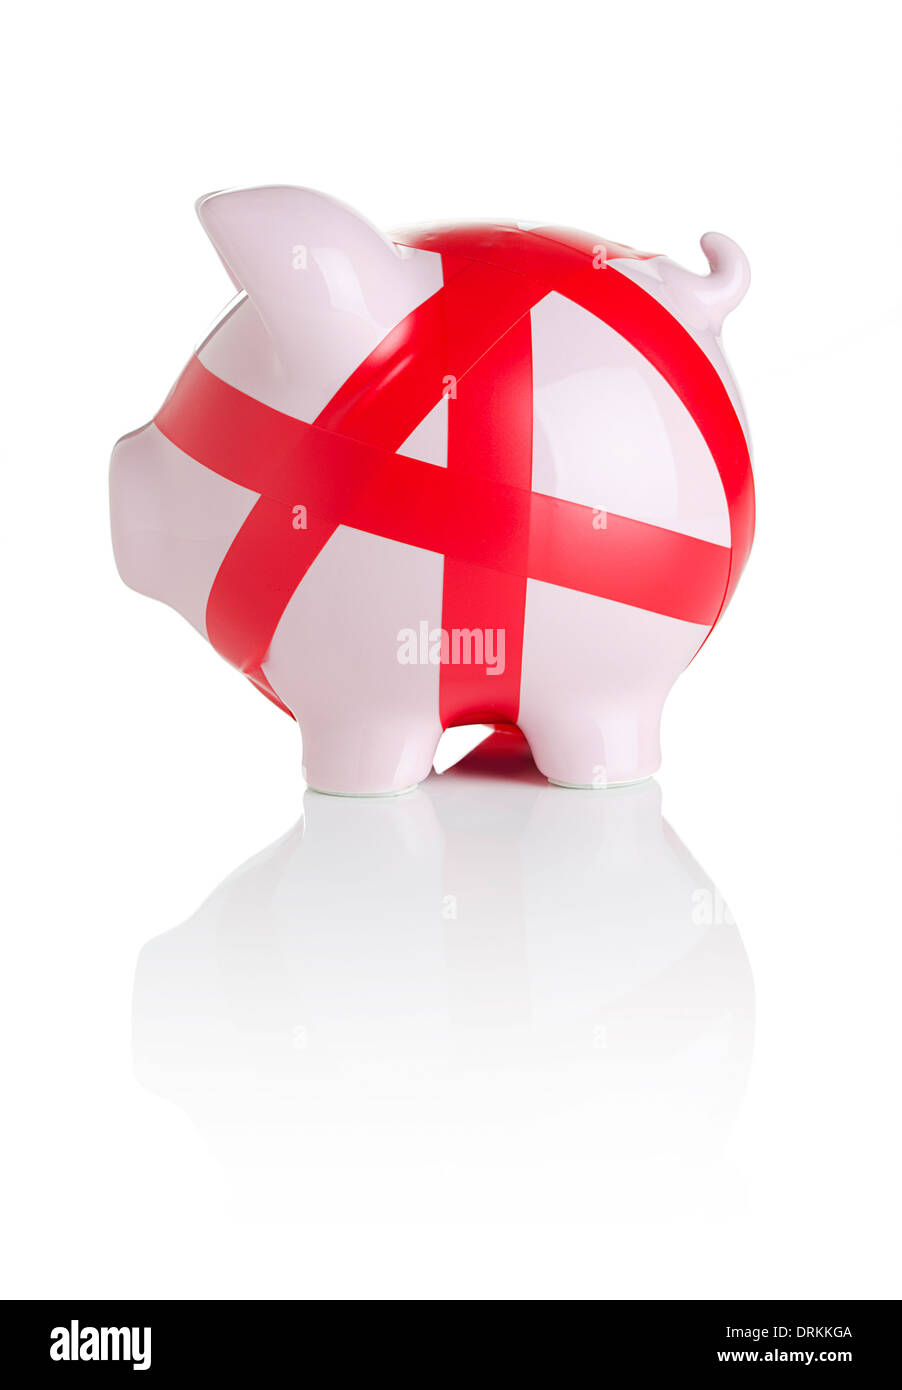 Piggy bank wrapped with red tape Stock Photo